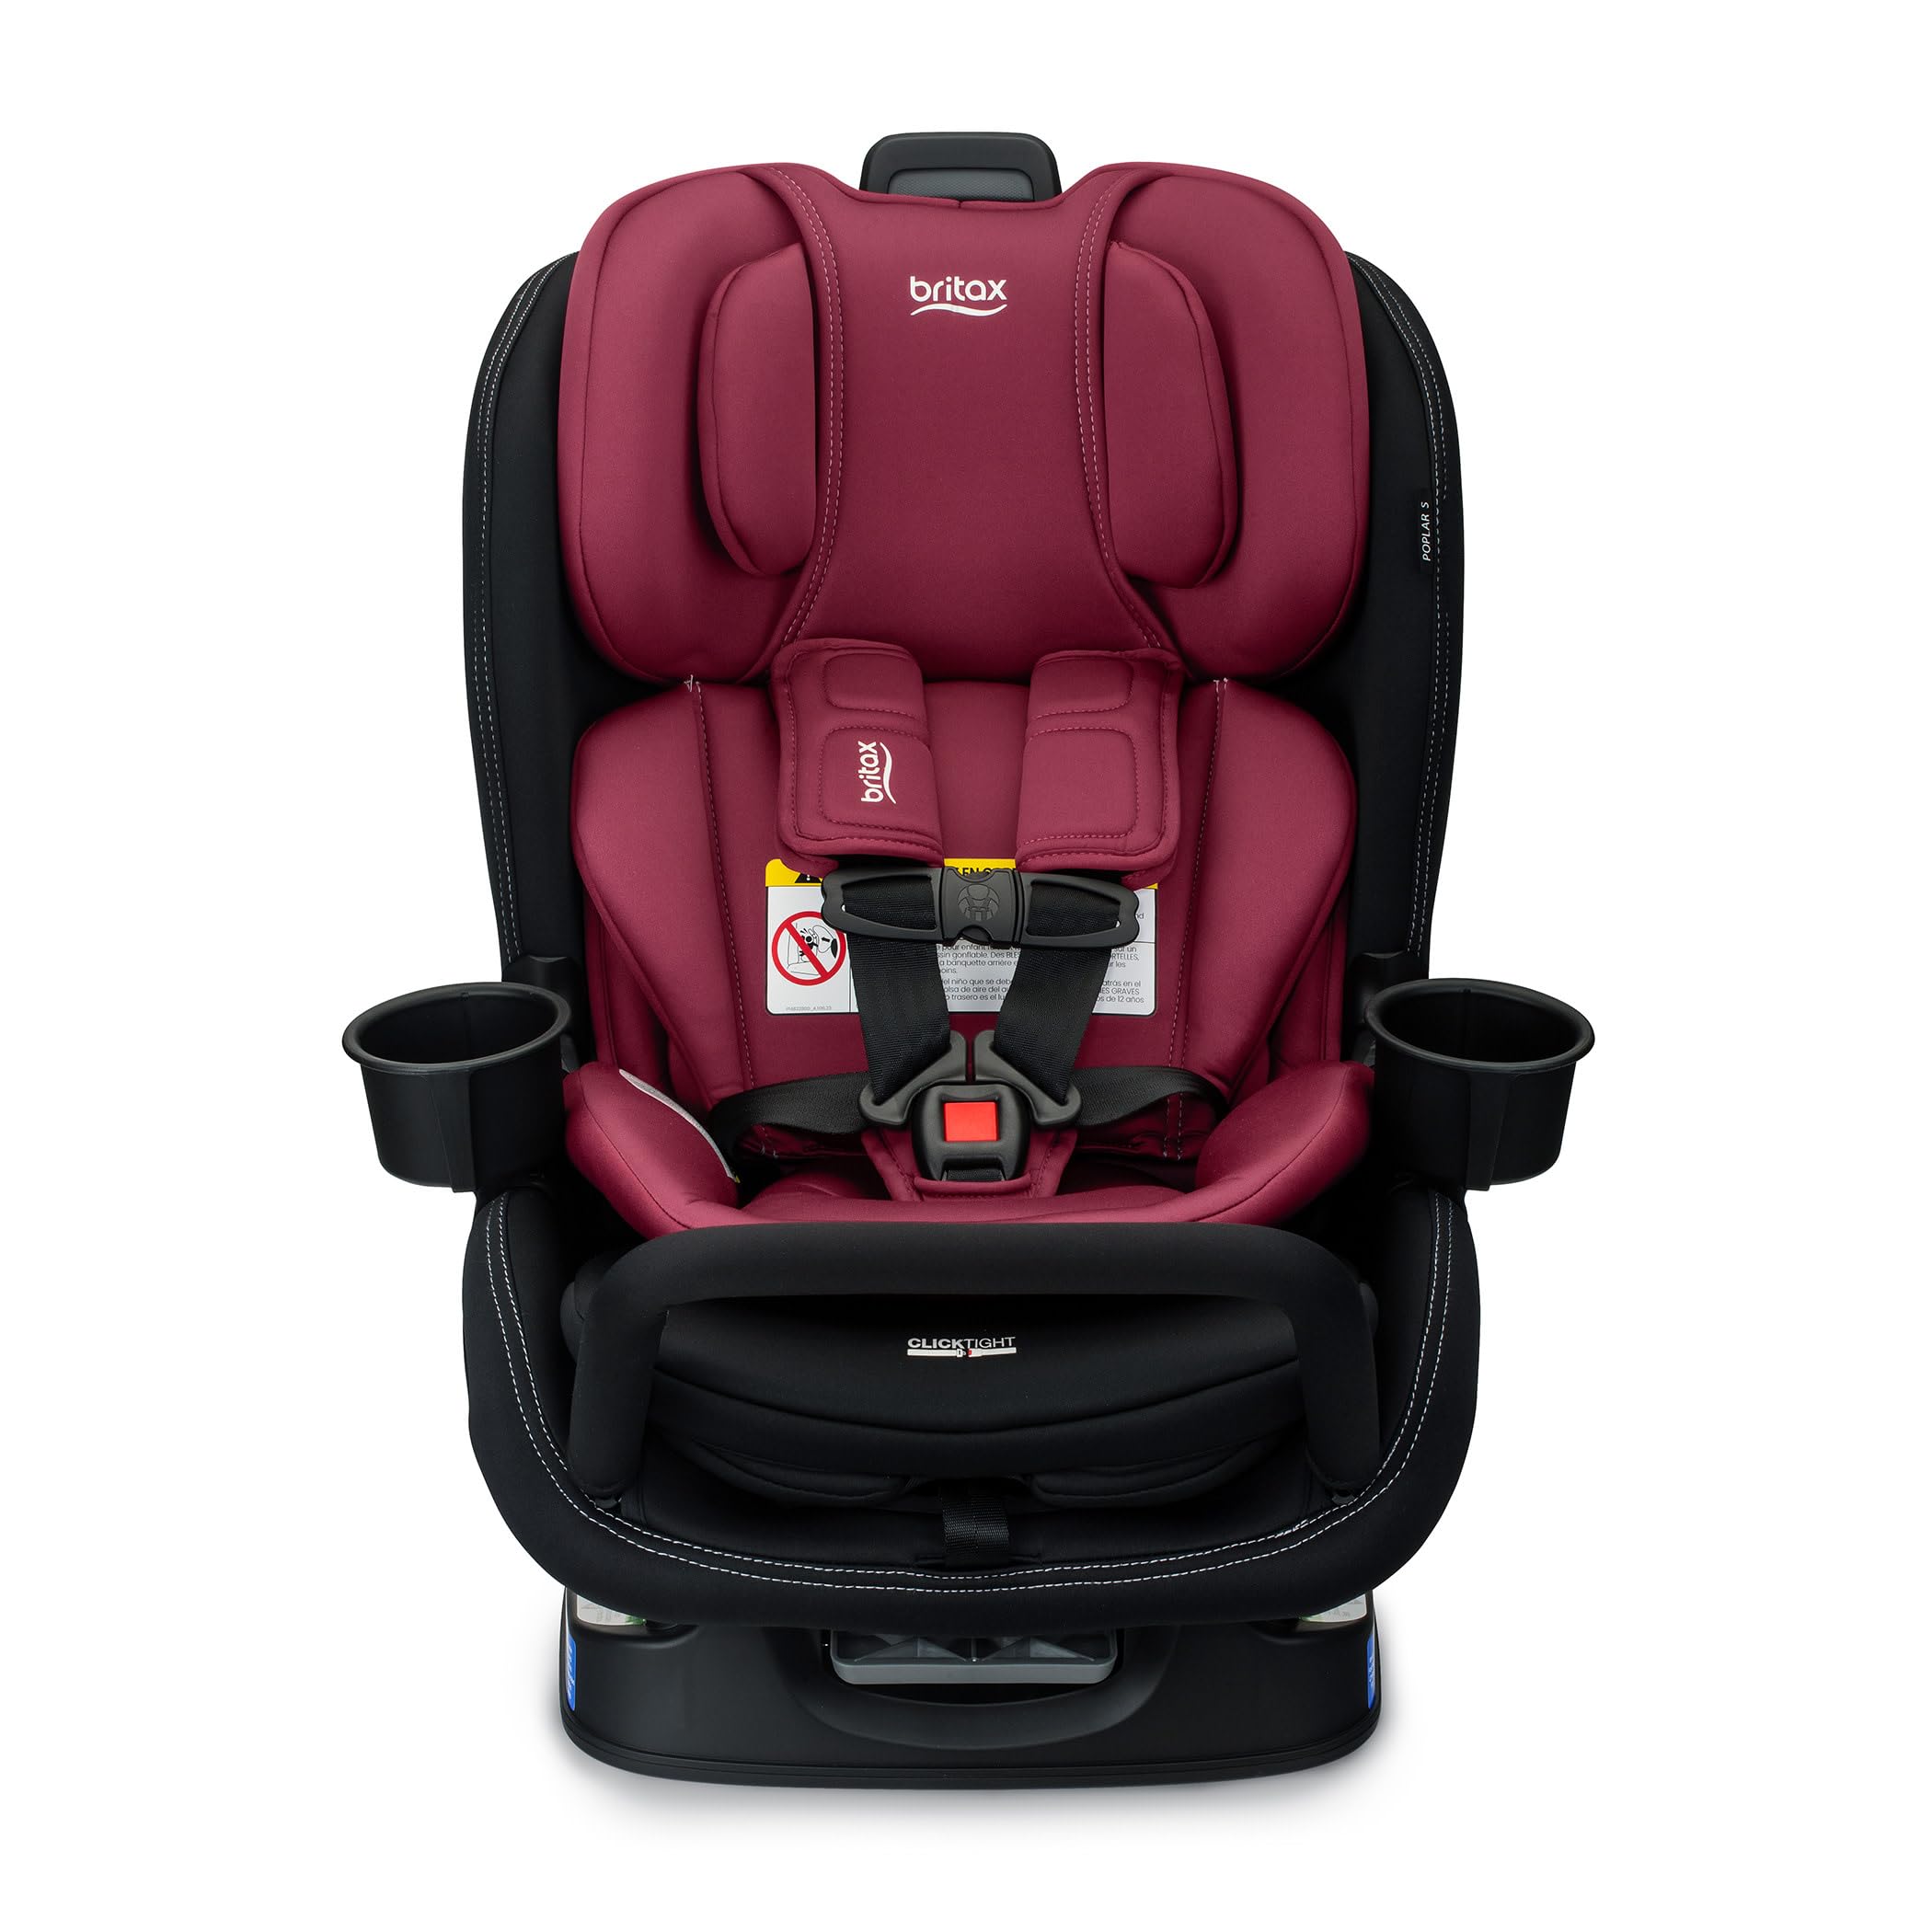 Britax Poplar S Convertible Car Seat, 2-in-1 Car Seat with Slim 17-Inch Design, ClickTight Technology, Ruby Onyx